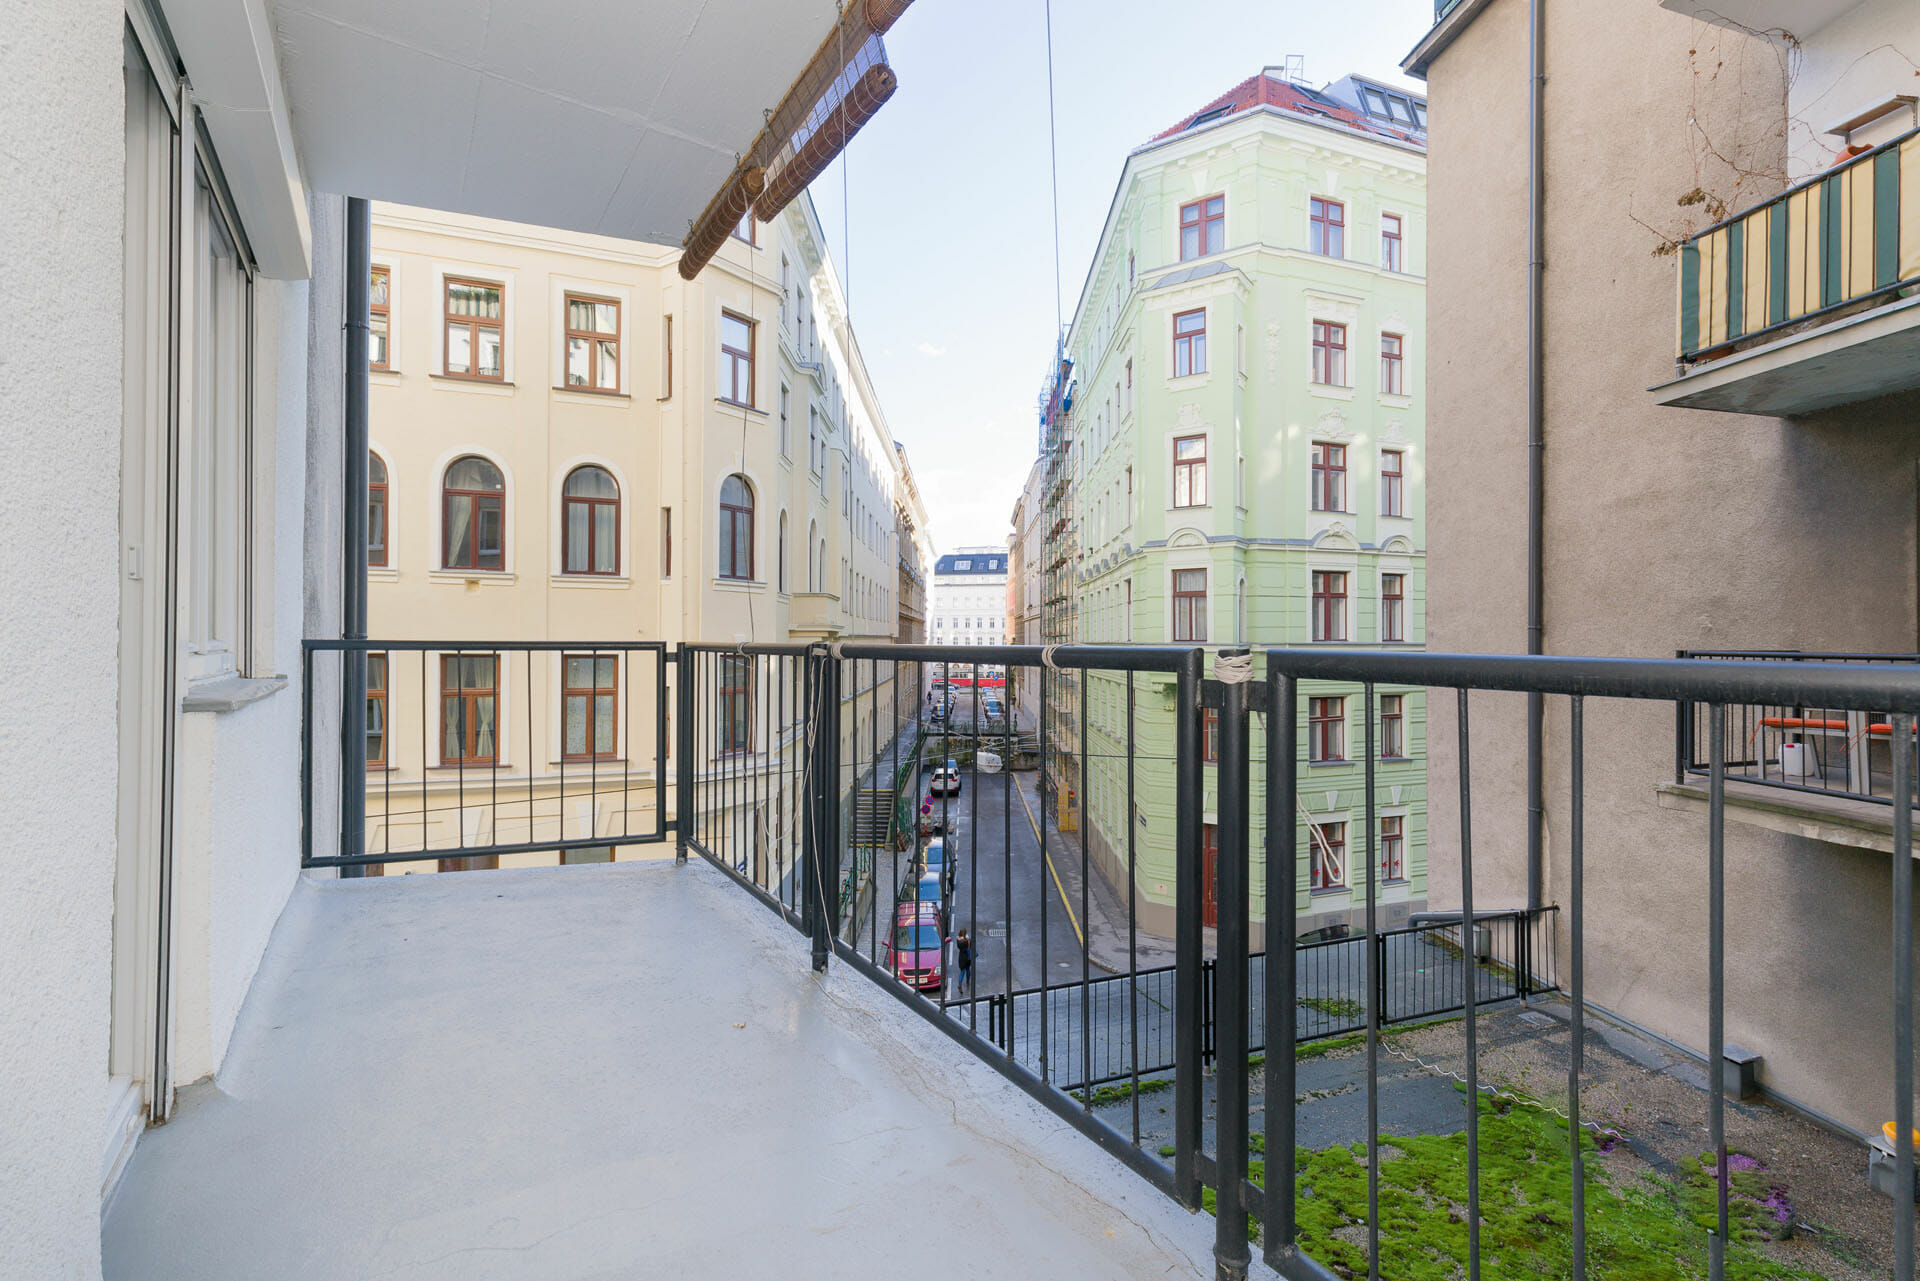 Prestige Apartments in Vienna Spacious Apartment close to Palais Liechtenstein. Bindergasse 5 - 9.  Internet, Digital Cable TV, Fully equipped kitchen, Fully furnished interior, Non smoking,